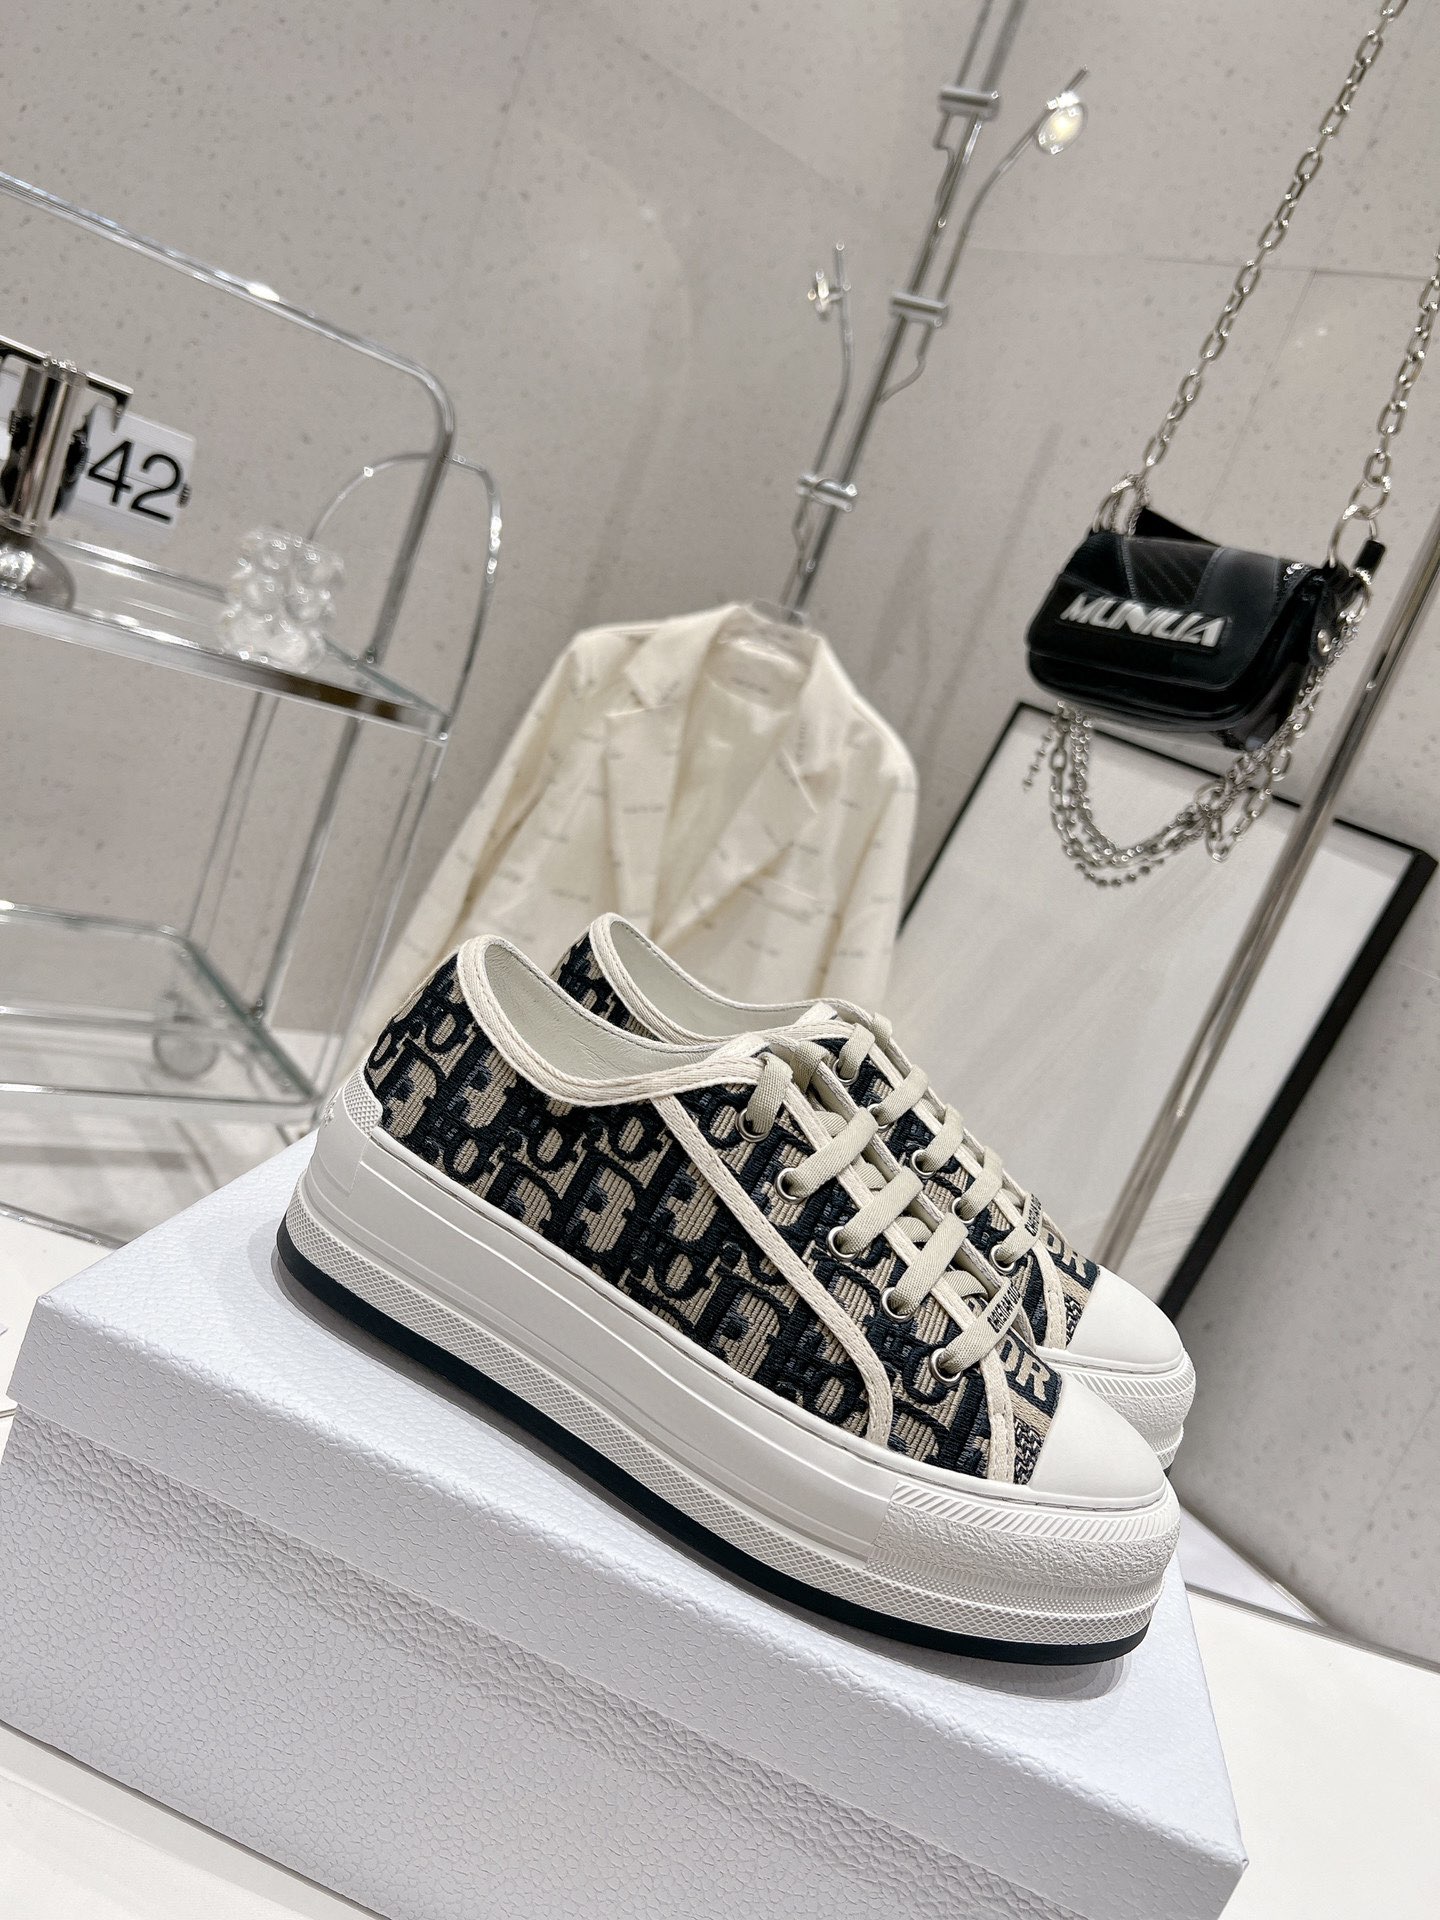 Dior Sneakers Canvas Shoes Embroidery Women Canvas Cotton PU Sheepskin TPU Oblique Casual